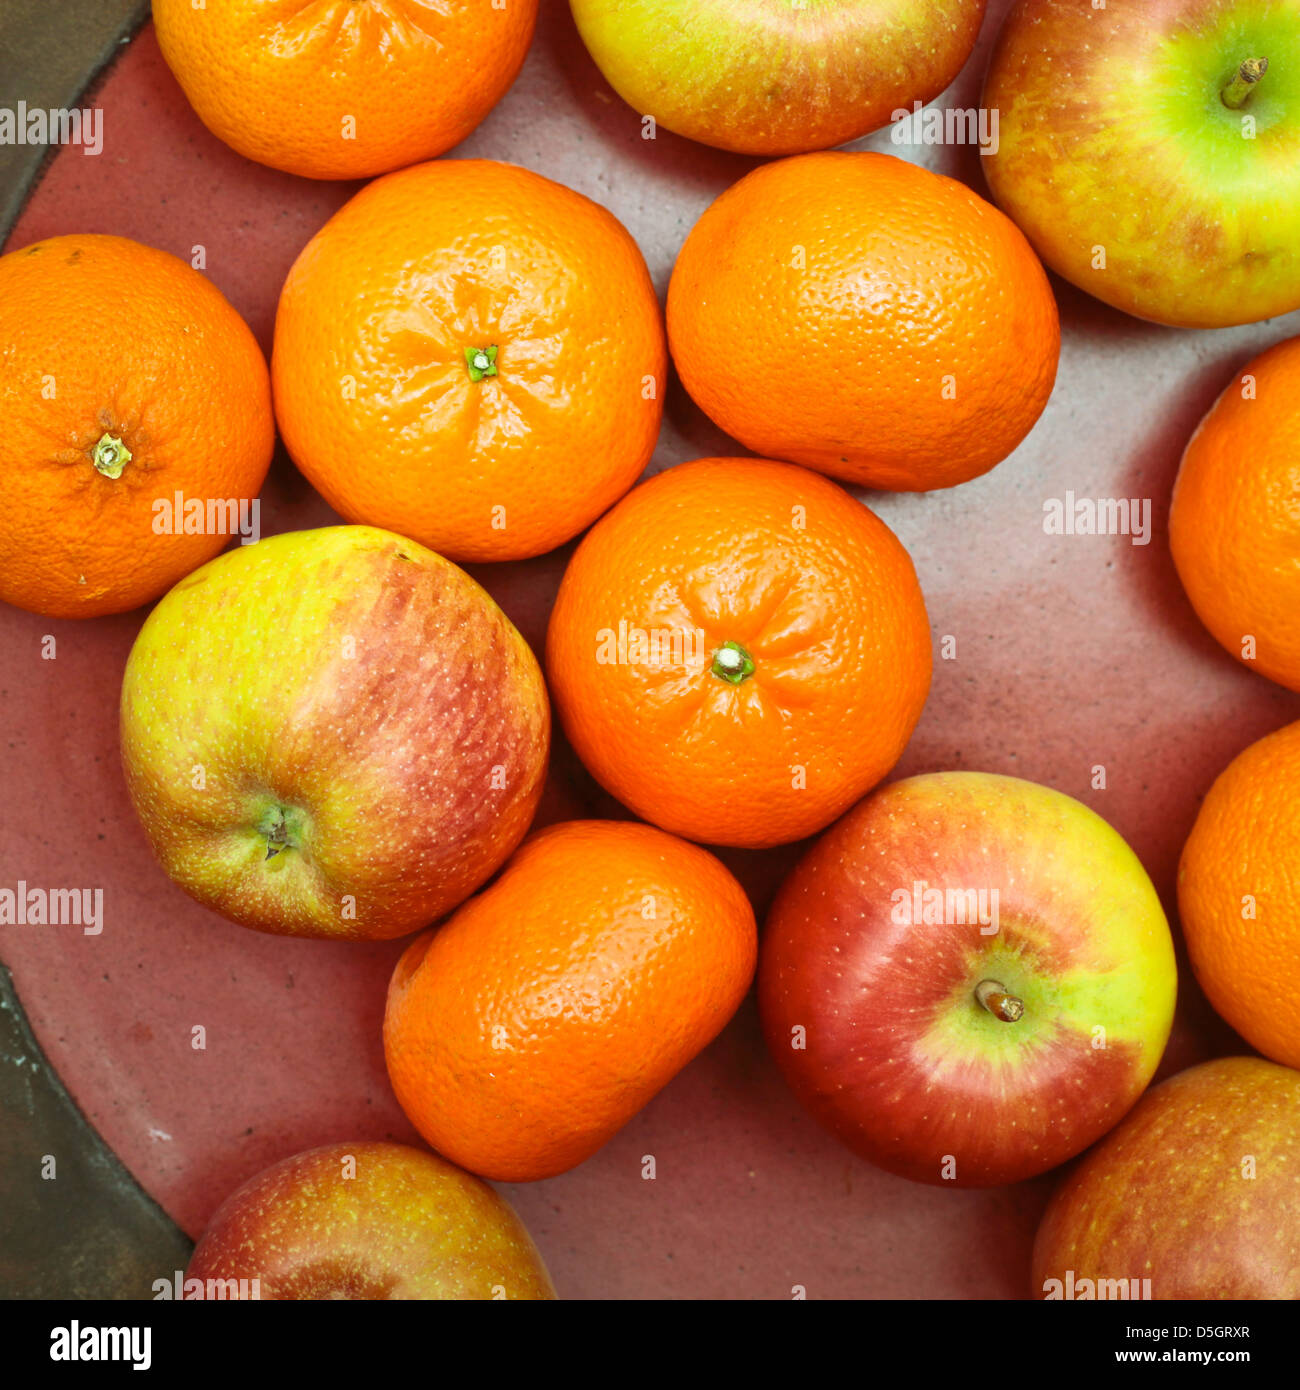 Variety of fresh fruit as a detailed background image Stock Photo